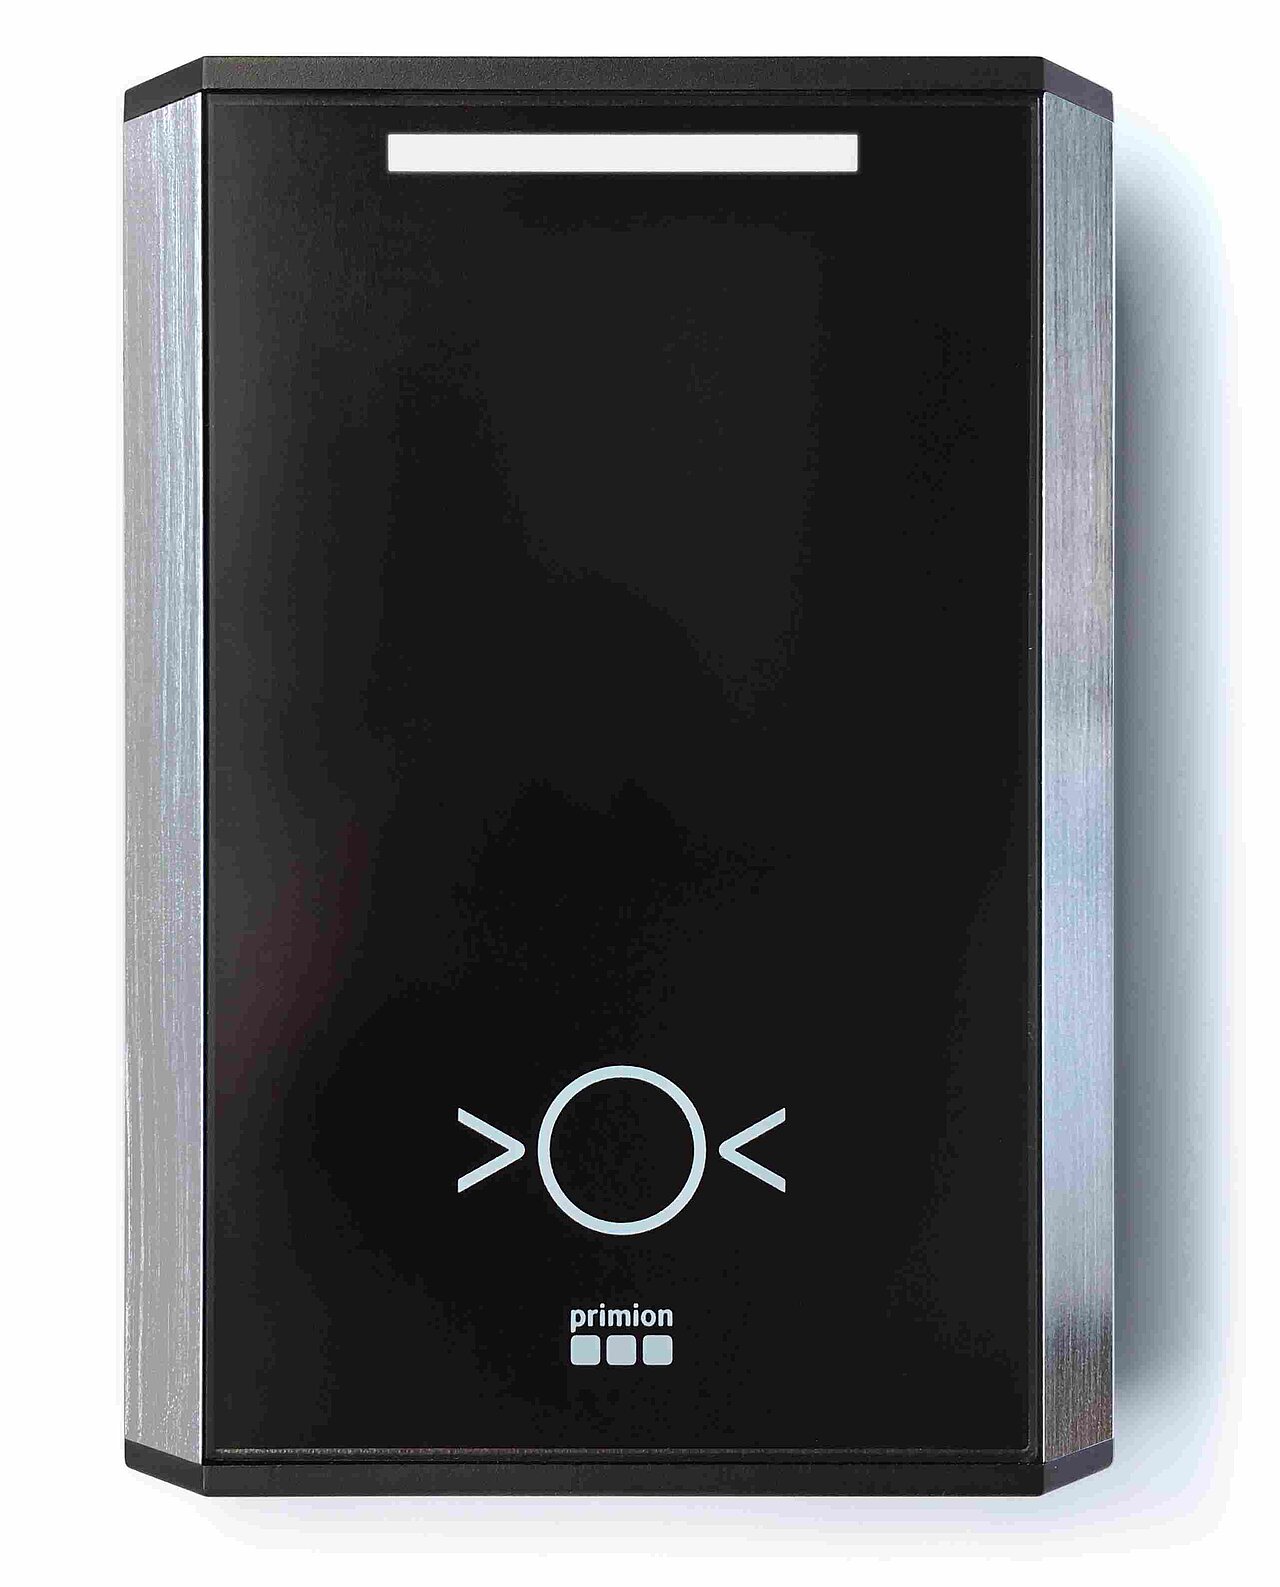 pKT Offline reader IDR-O for access control systems